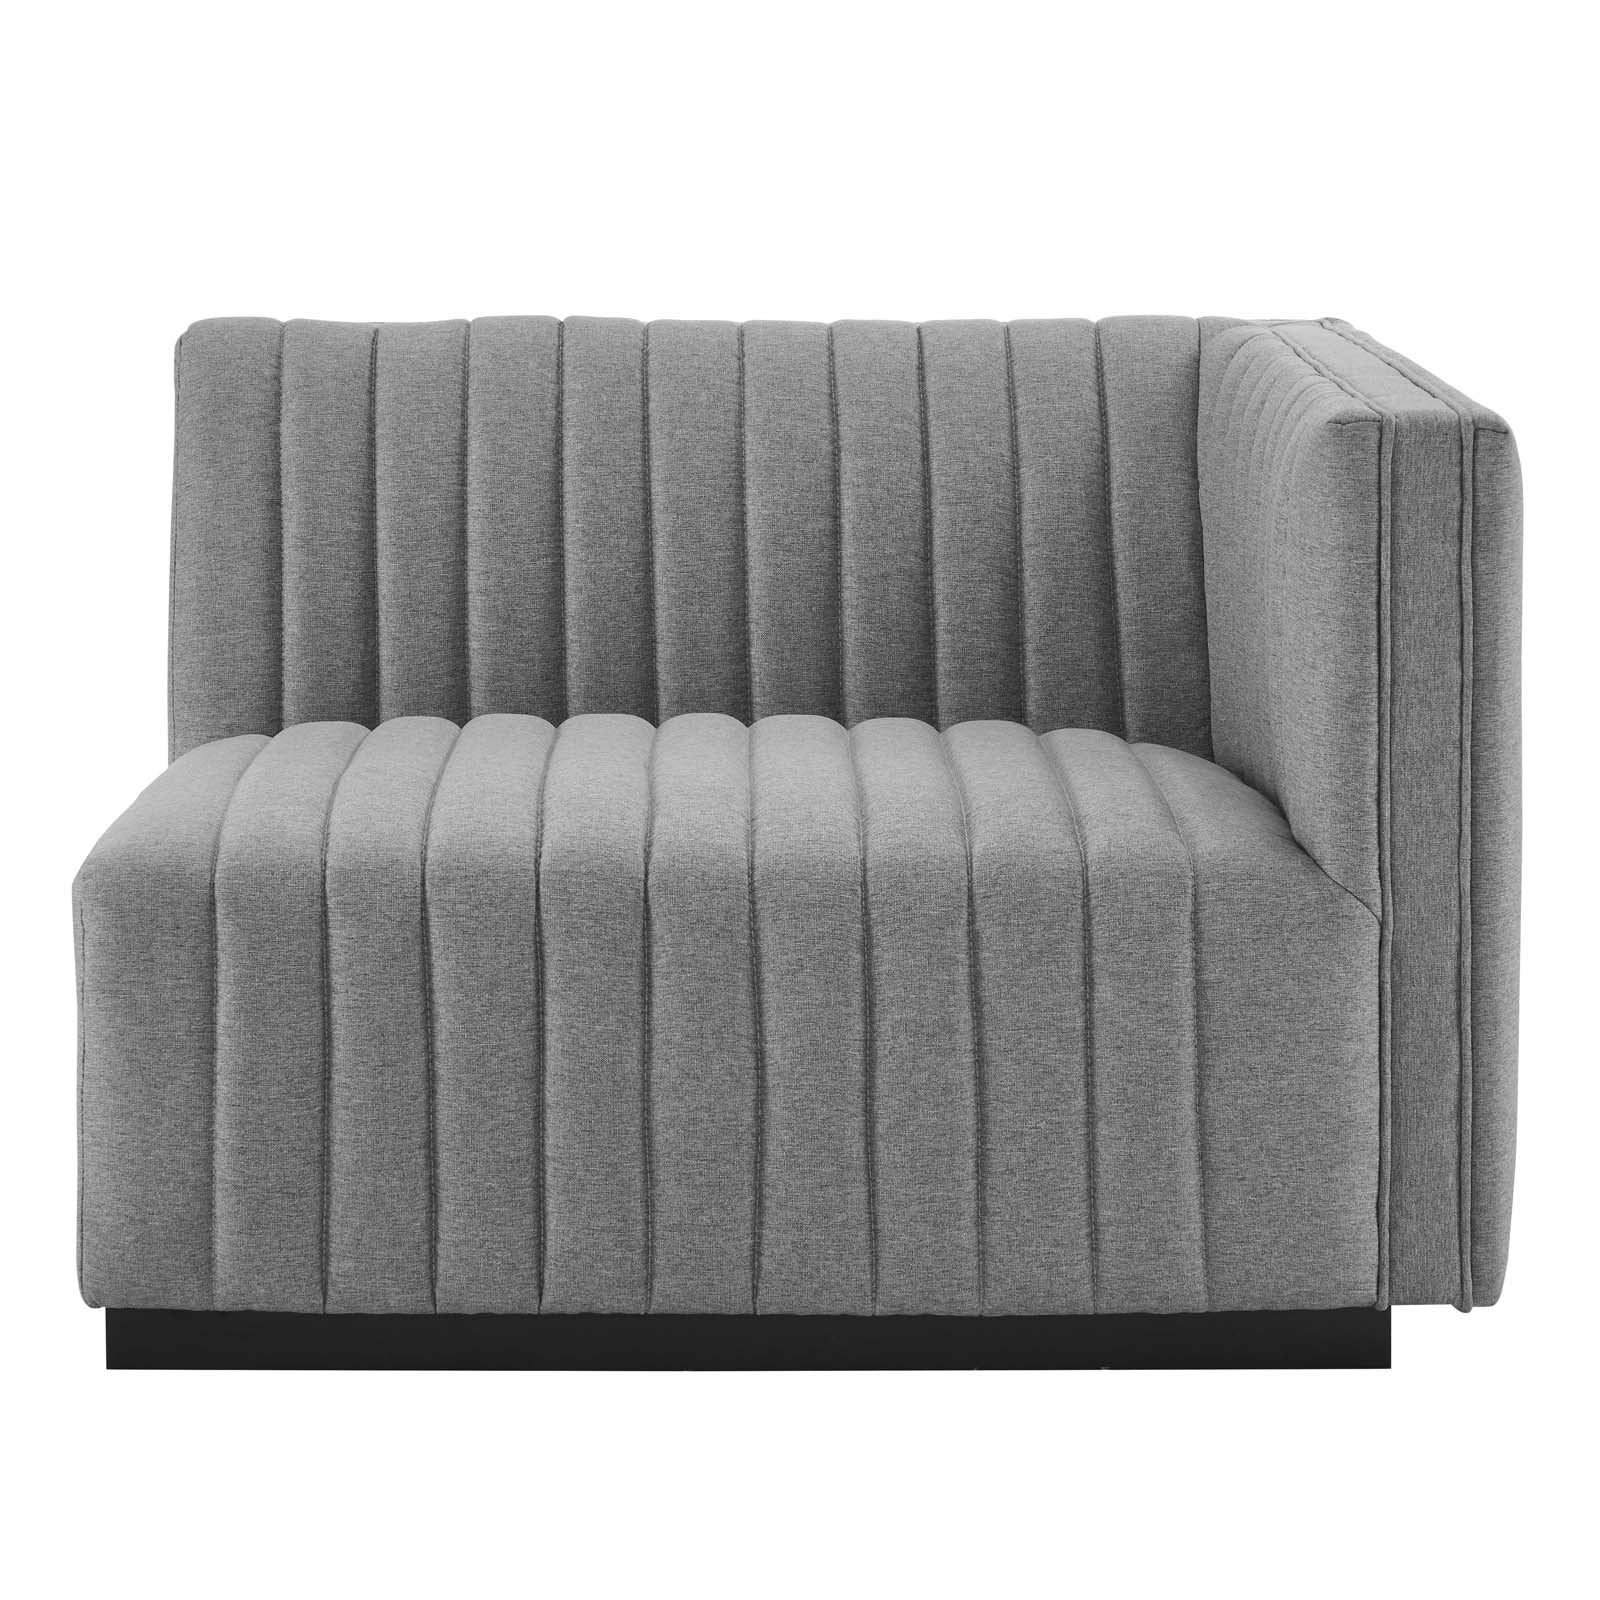 Conjure Channel Tufted Upholstered Fabric 5-Piece Sectional - East Shore Modern Home Furnishings